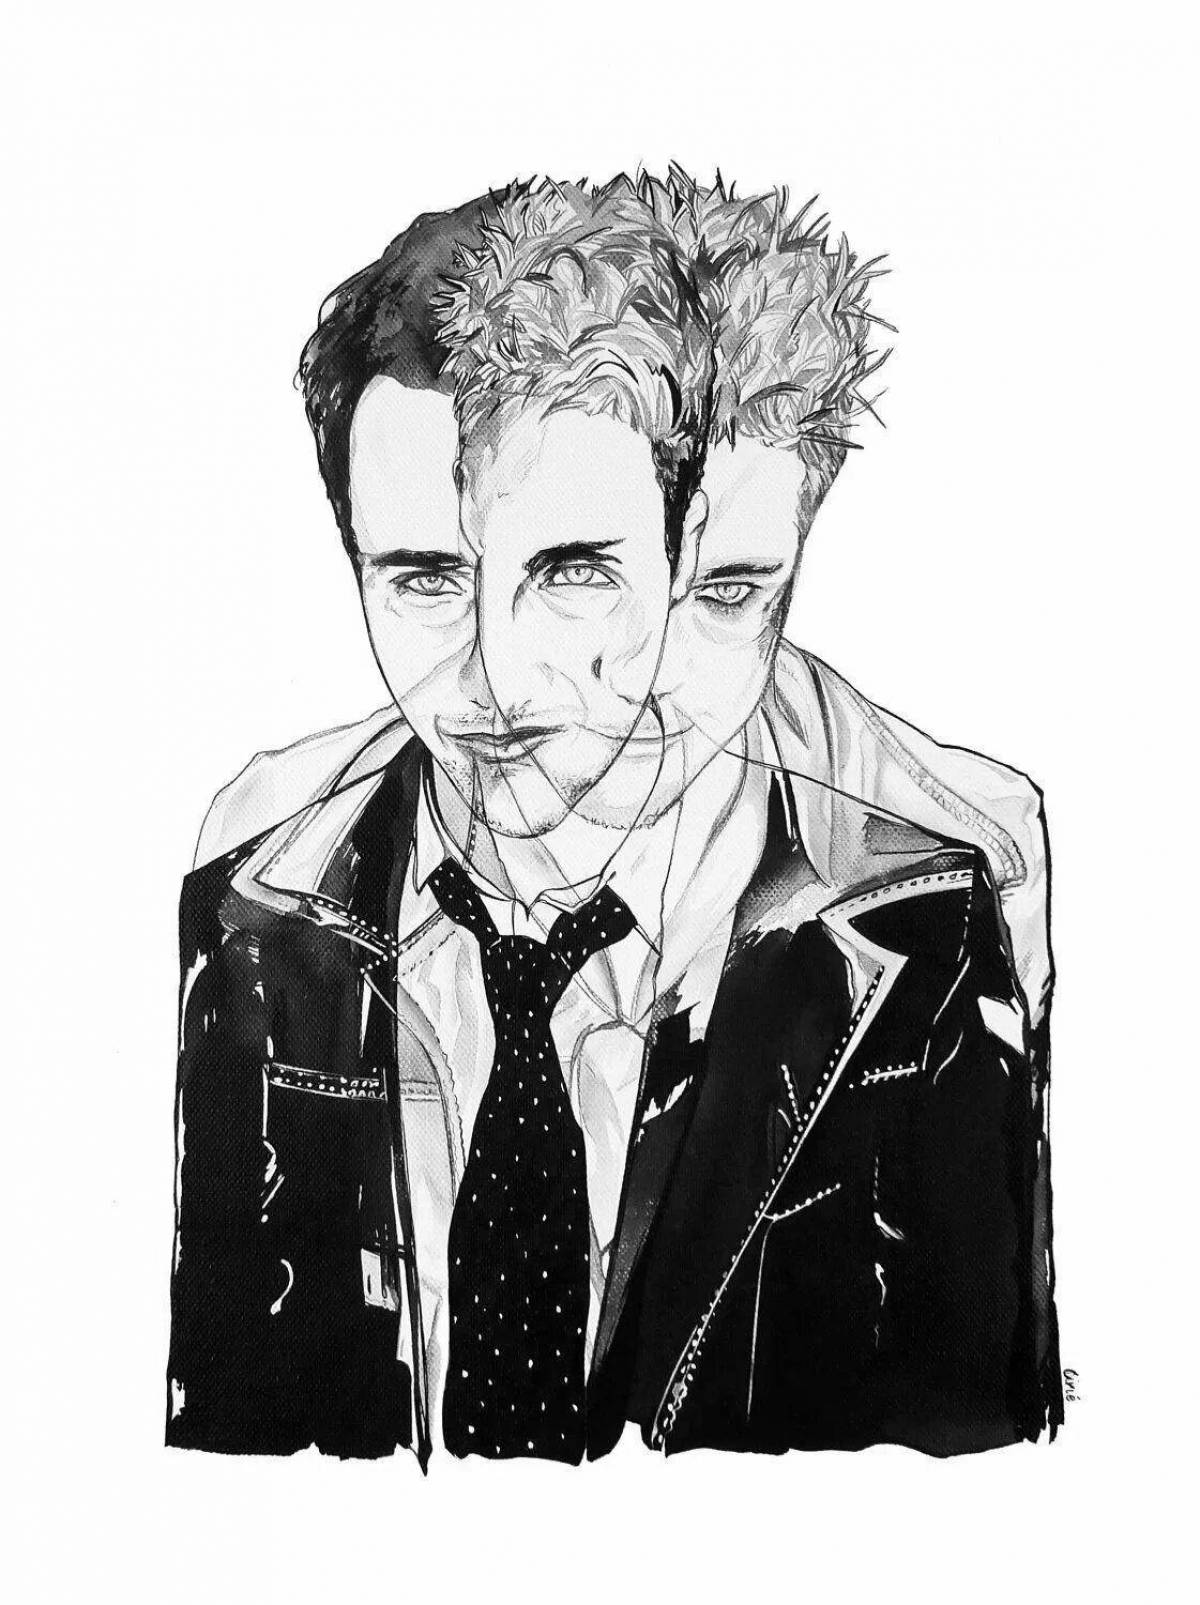 Charming fight club coloring book